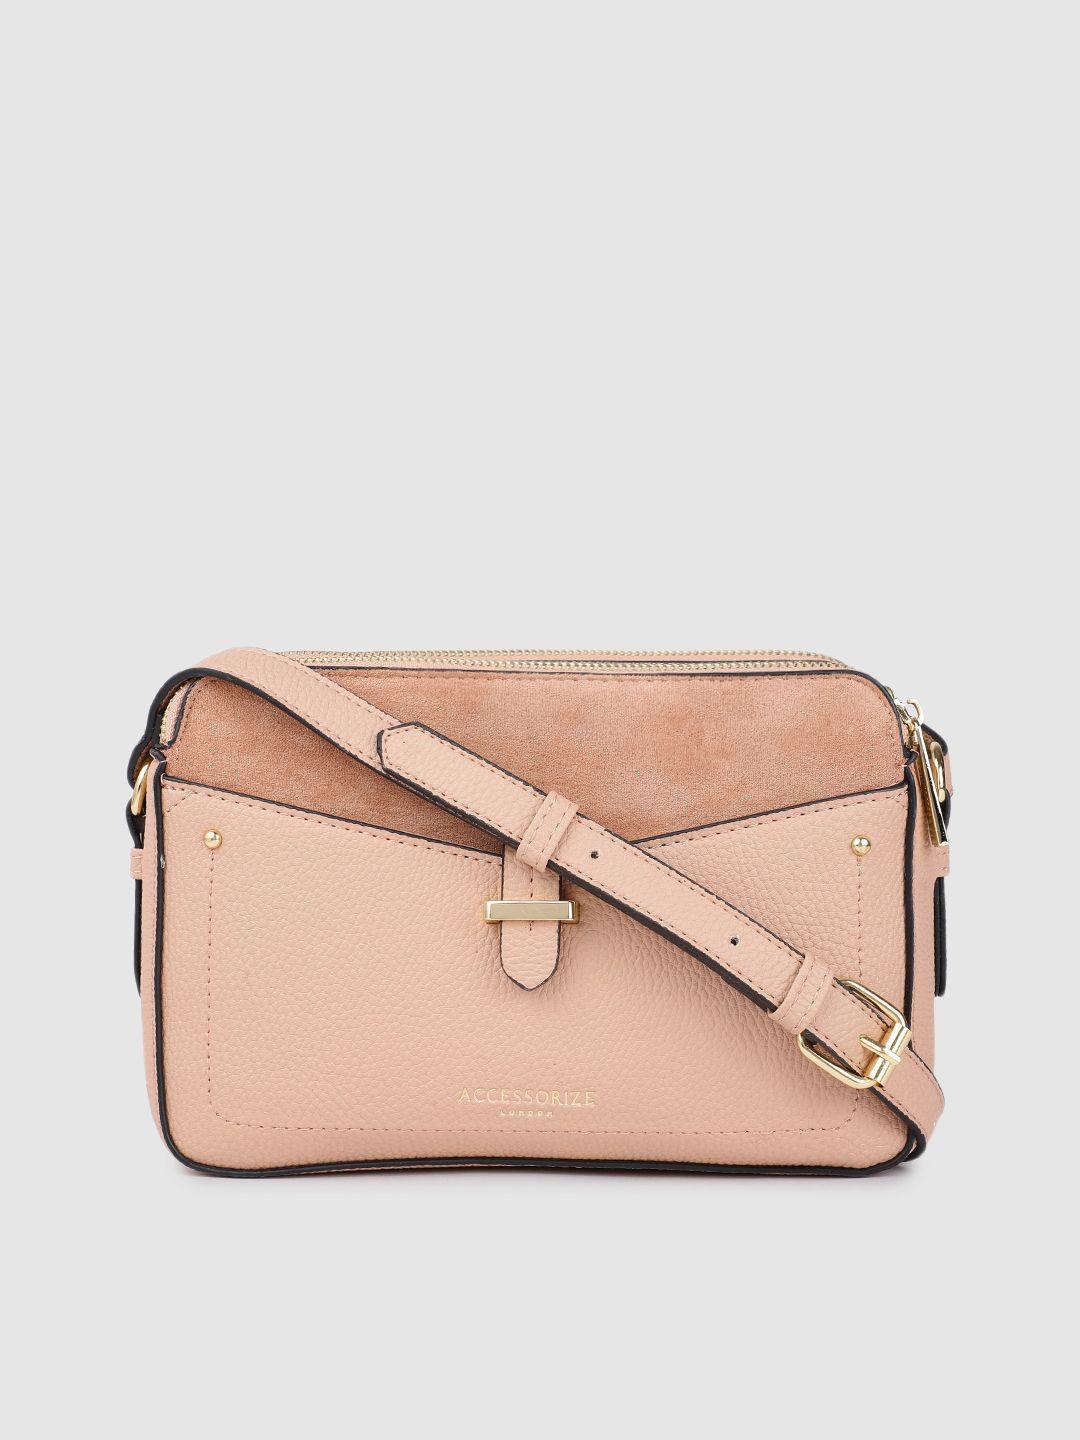 accessorize women dusty pink pu structured sling bag